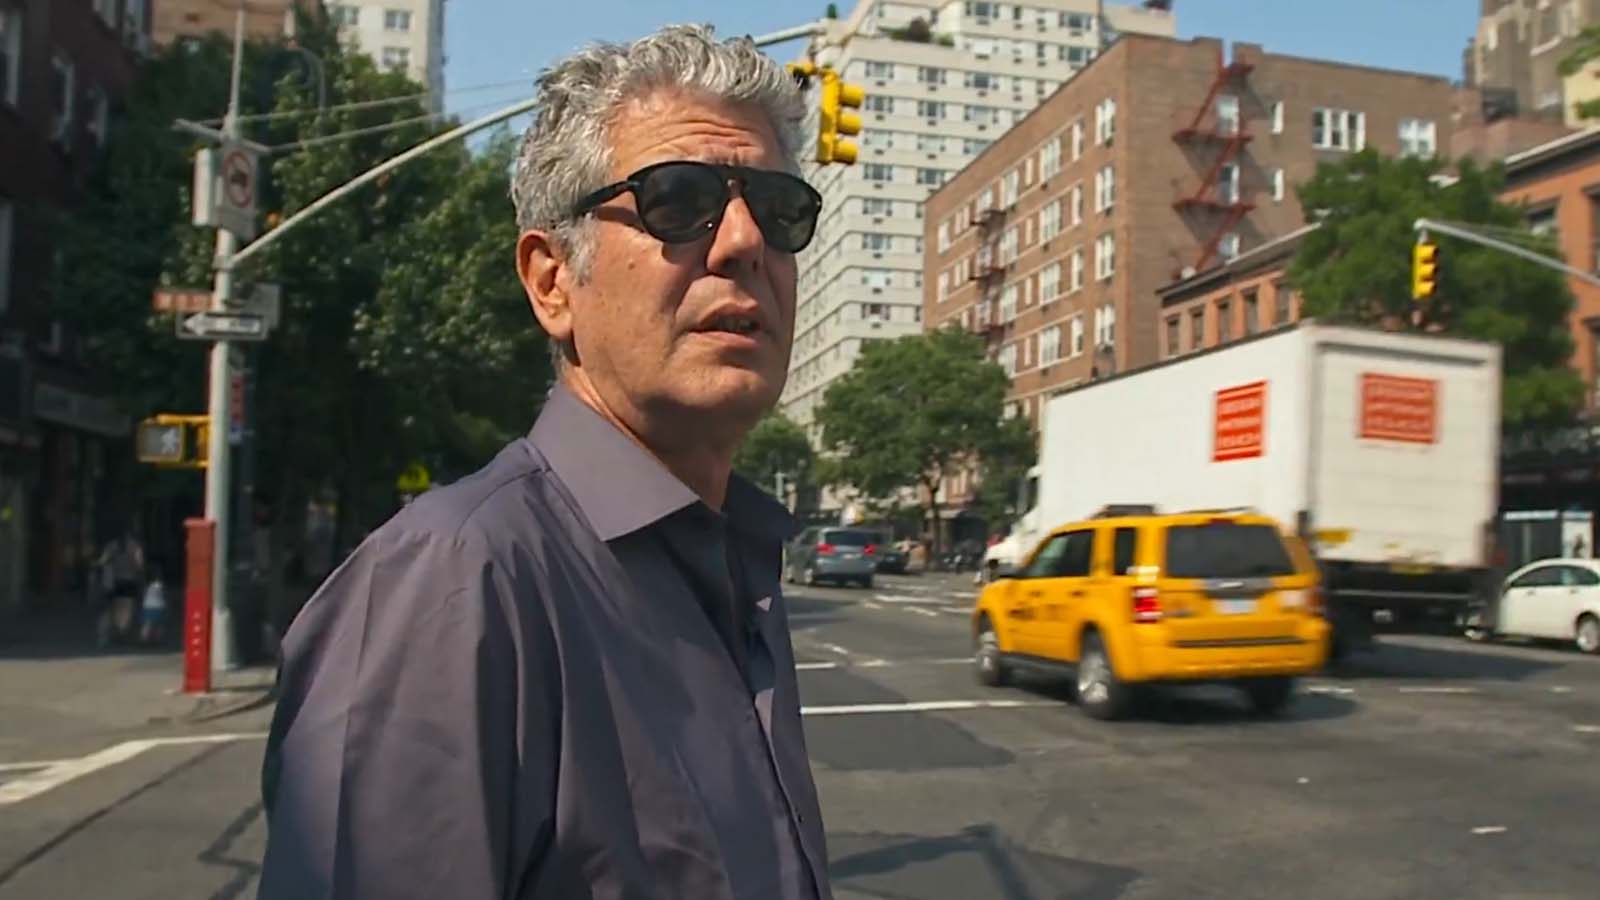 Anthony Bourdain walks the streets of New York. Image © Focus Features